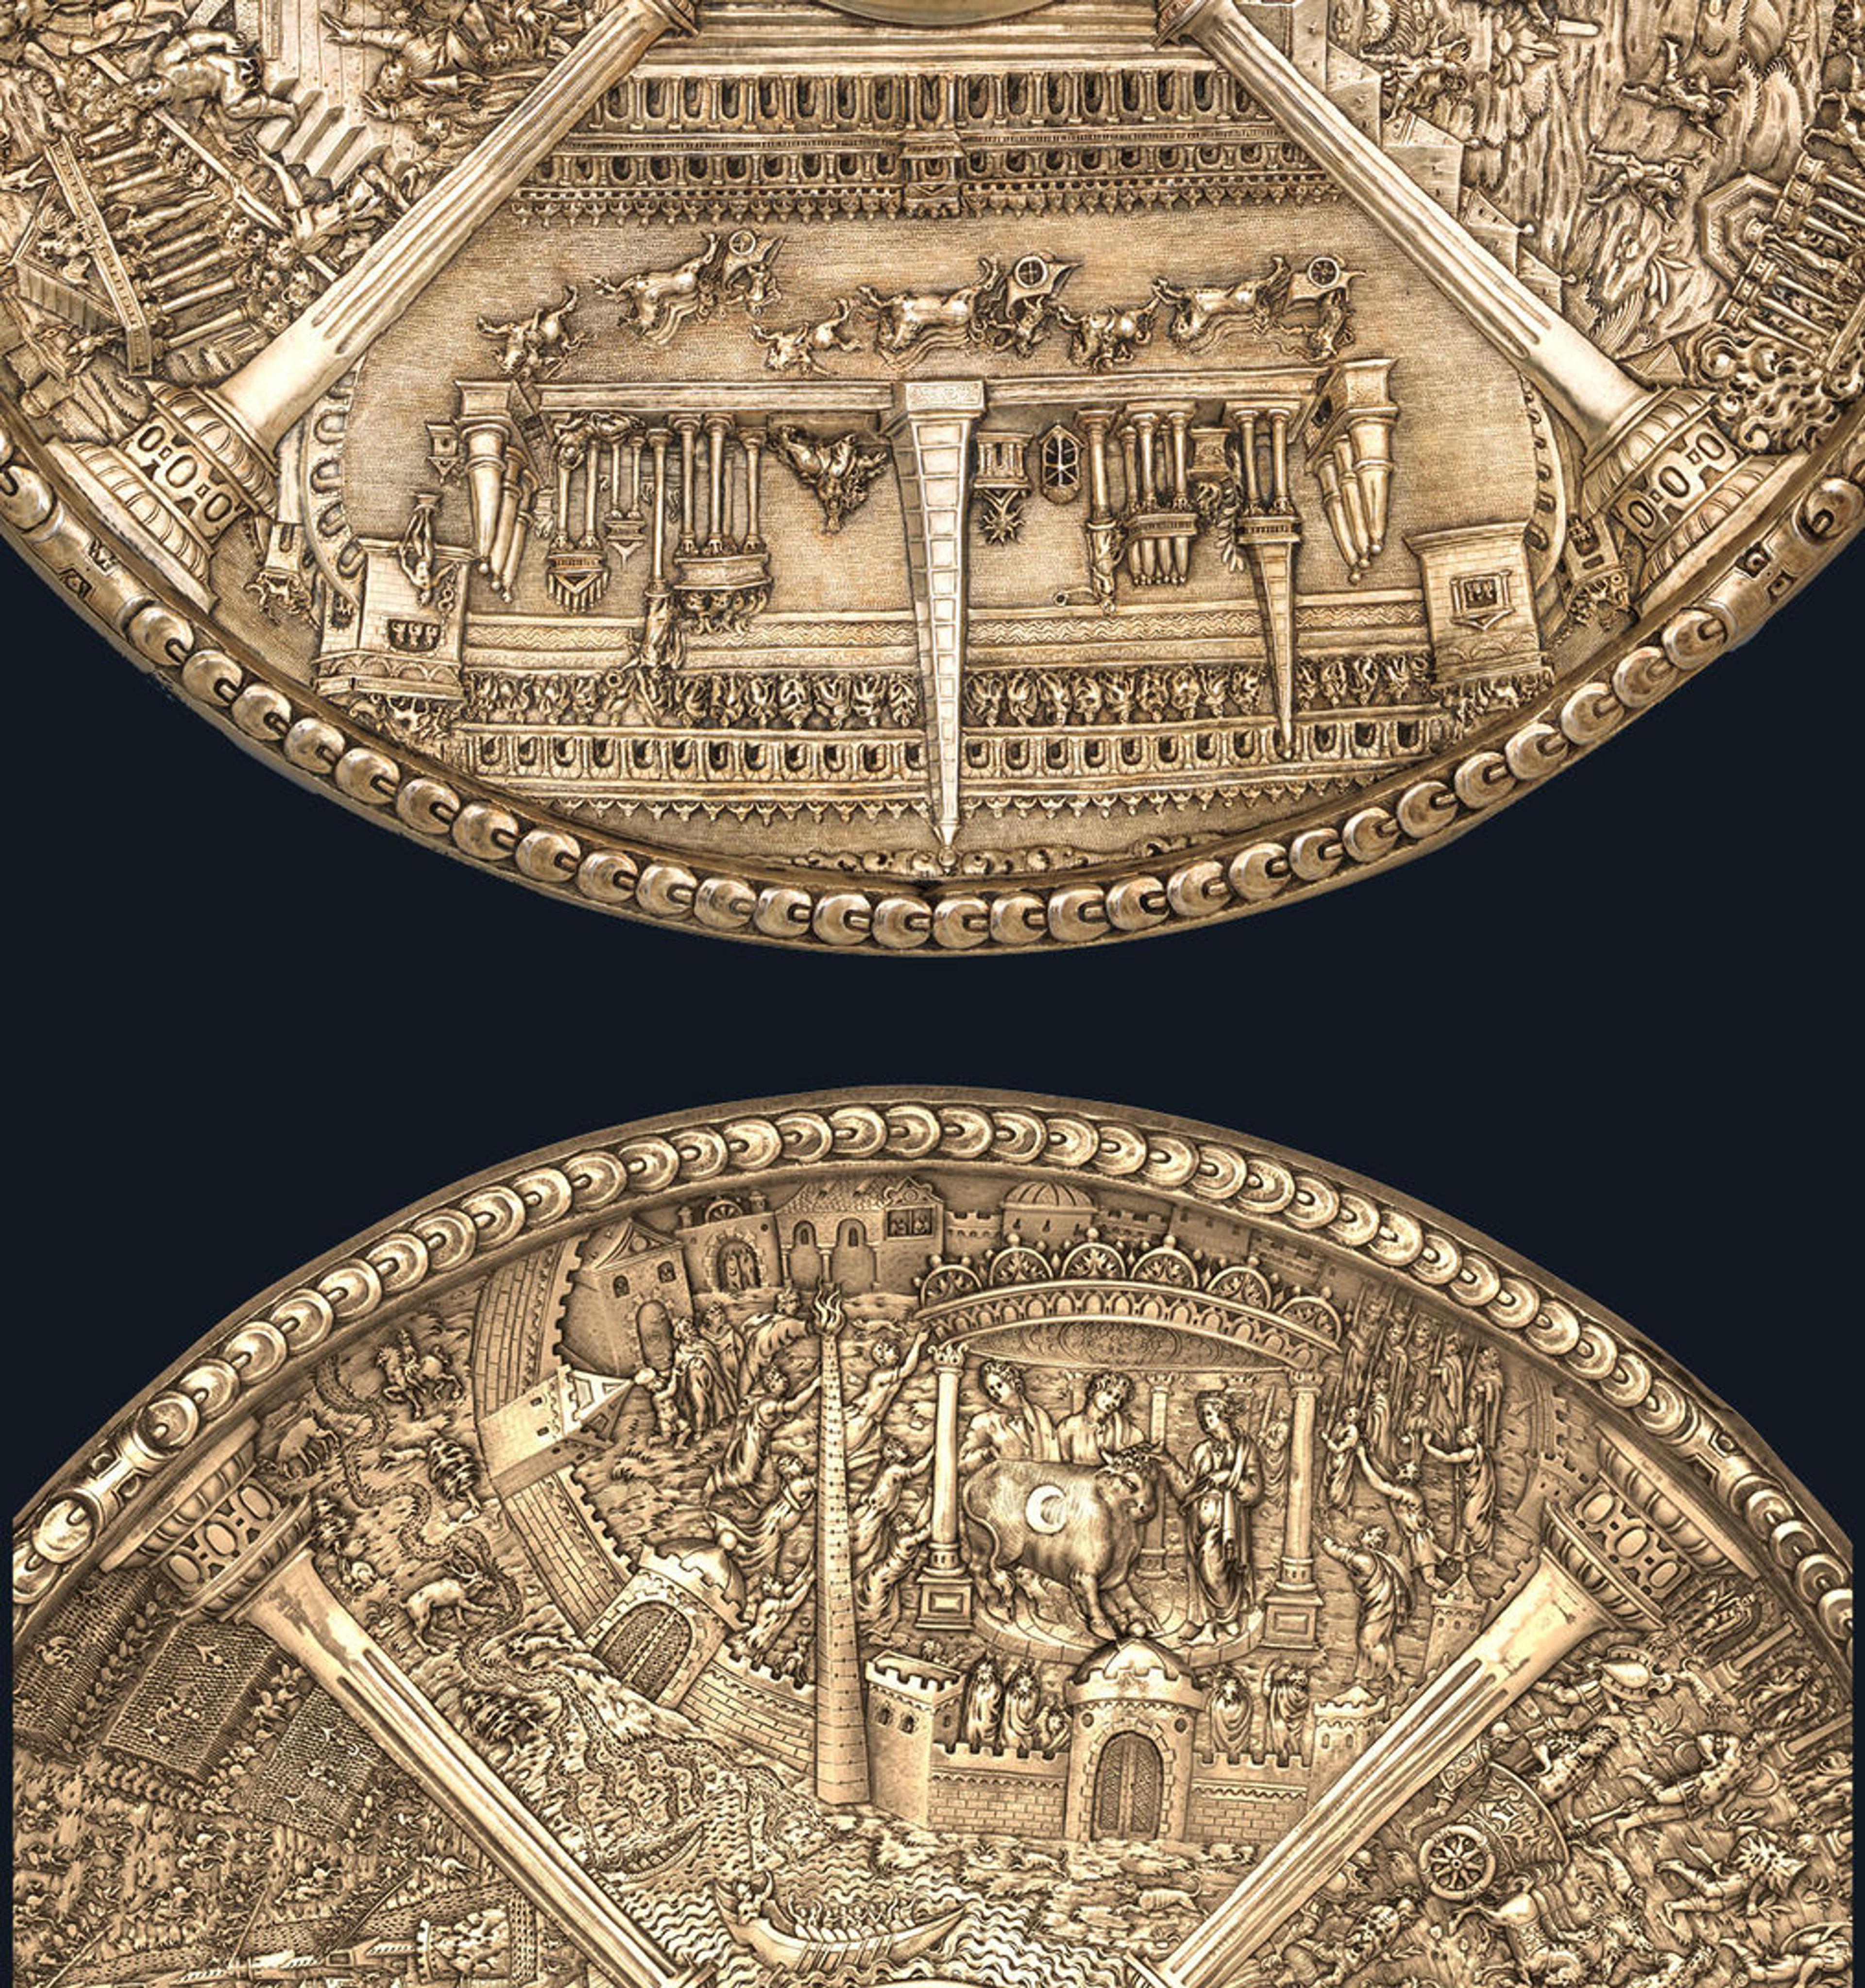 Details from the dish for the emperor Domitian and the dish for the emperor TItus